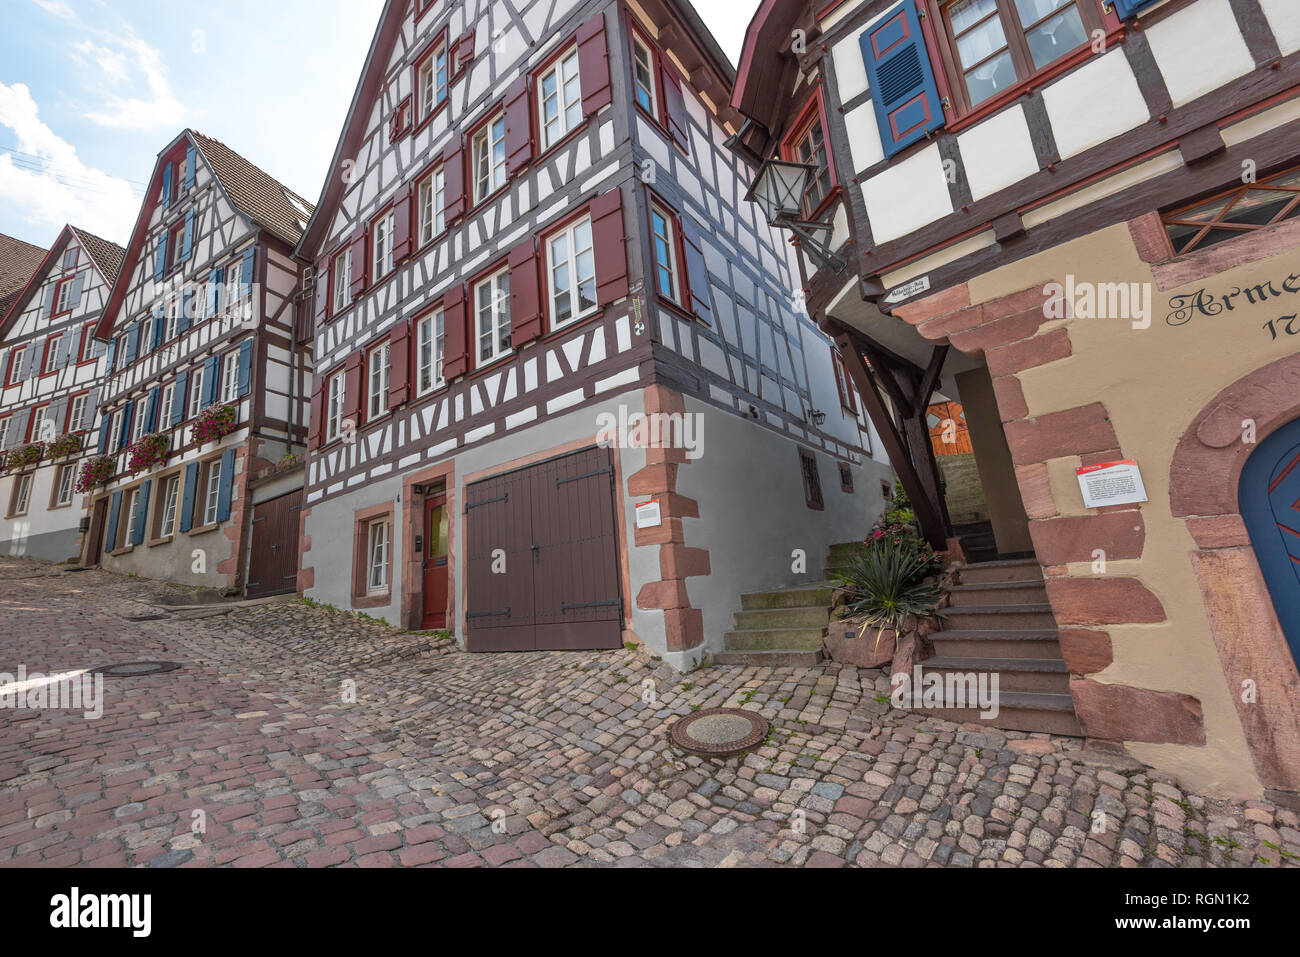 row of half-timbered houses, town Schiltach, Black Forest, Germany, cobblestone street of a historic medieval town Stock Photo